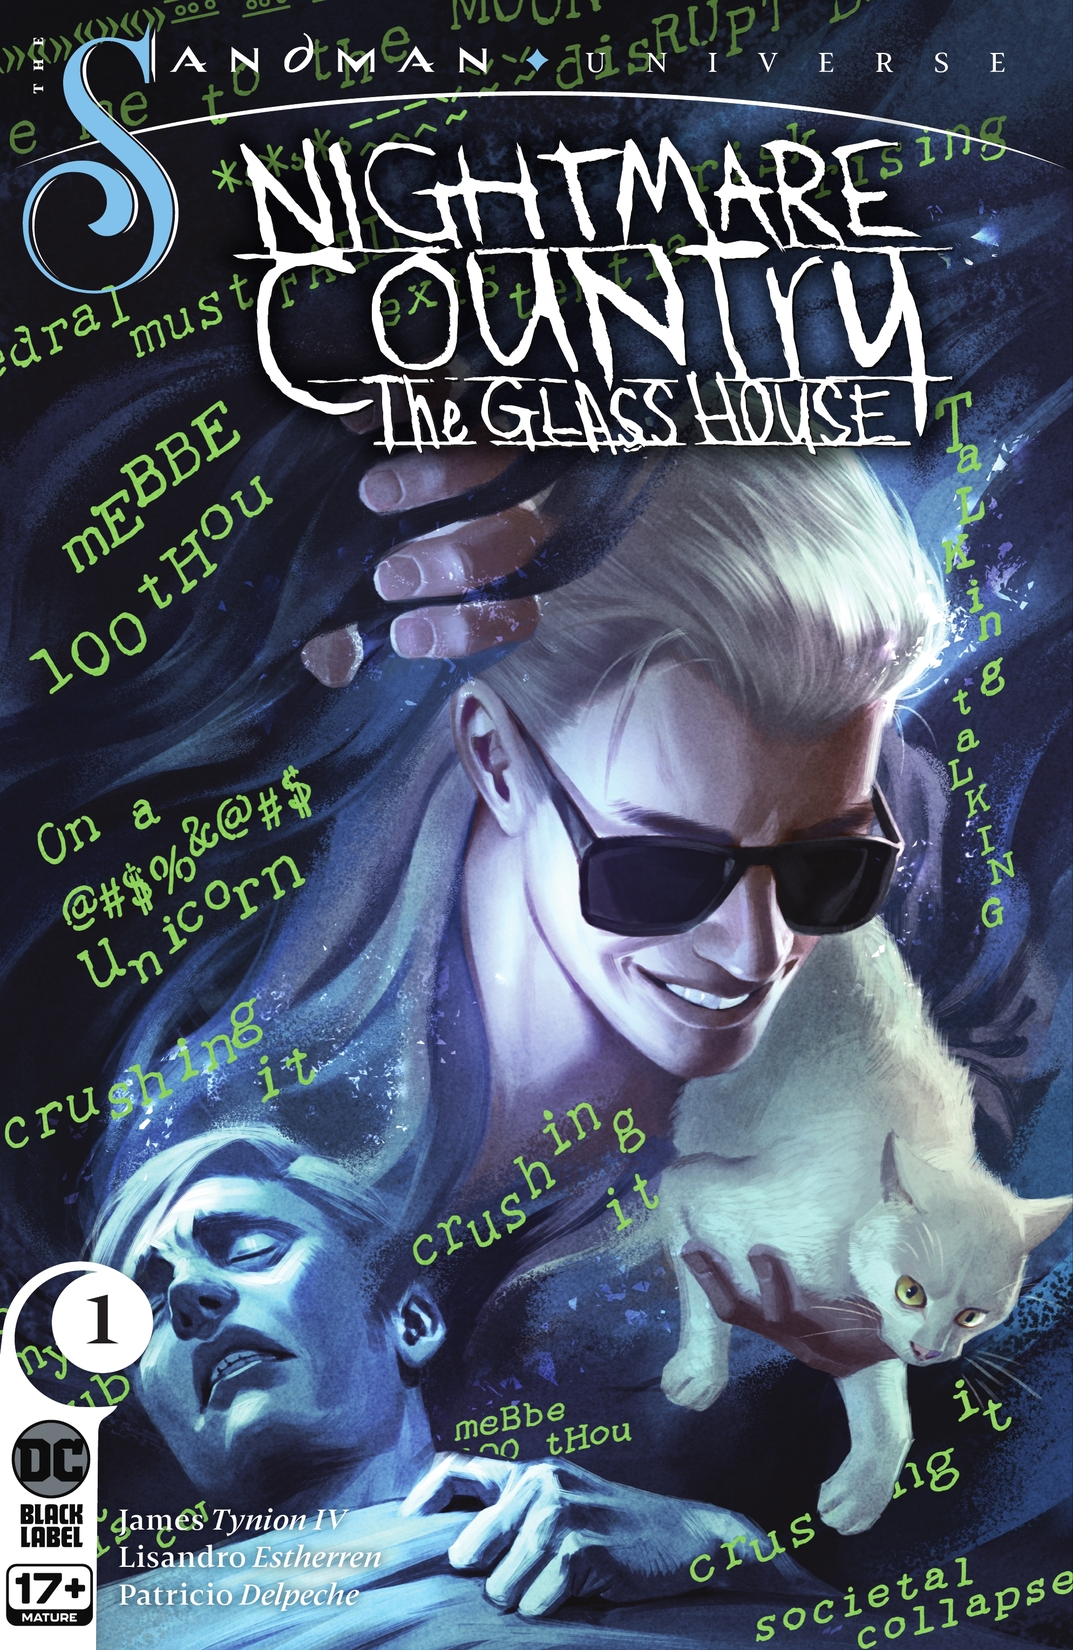 The Sandman Universe: Nightmare Country - The Glass House #1 preview images